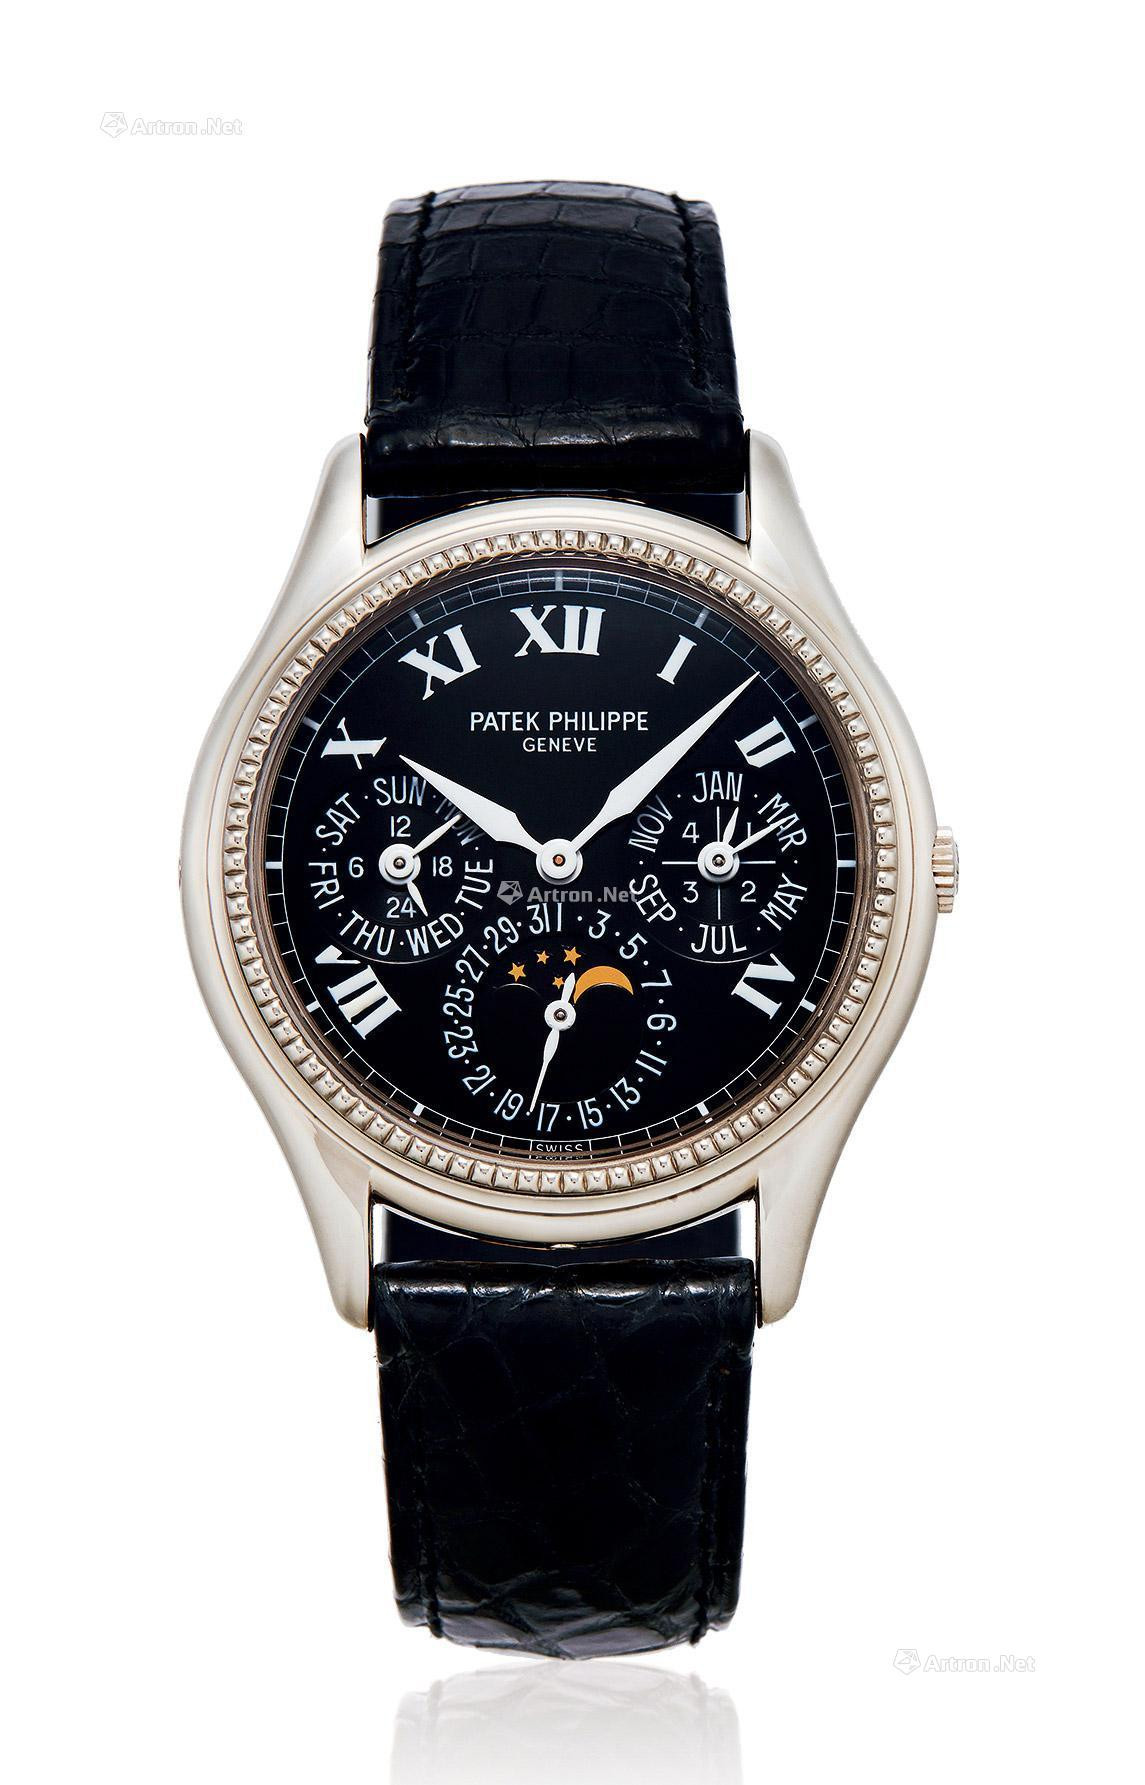 PATEK PHILIPPE A WHITE GOLD PERPETUAL CALENDAR AUTOMATIC WRISTWATCH WITH MOON-PHASE AND 24 HOUR INDICATION